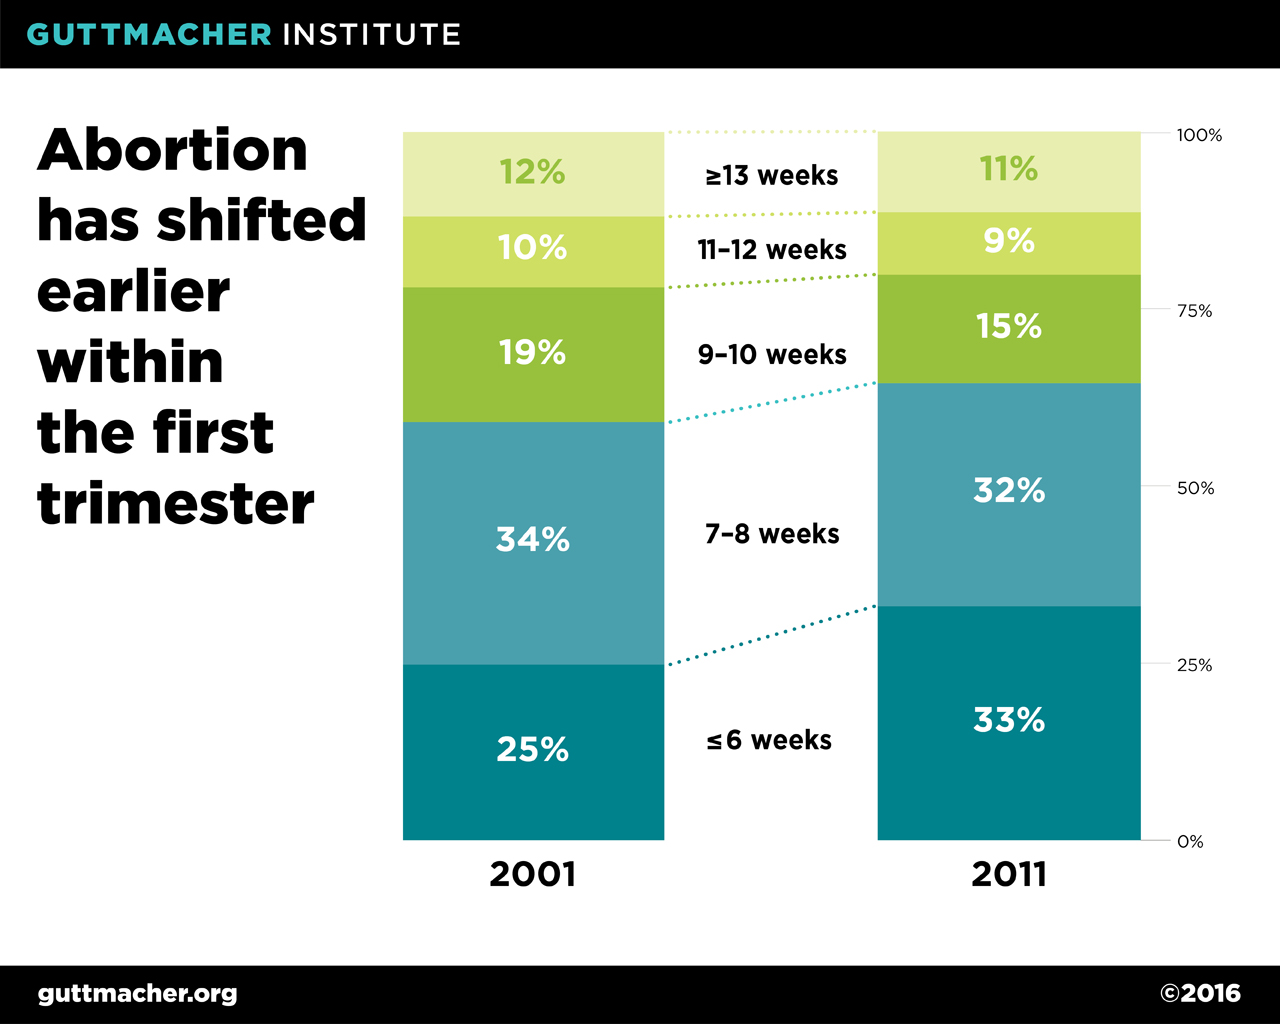 Abortion has shifted earlier within the first trimester